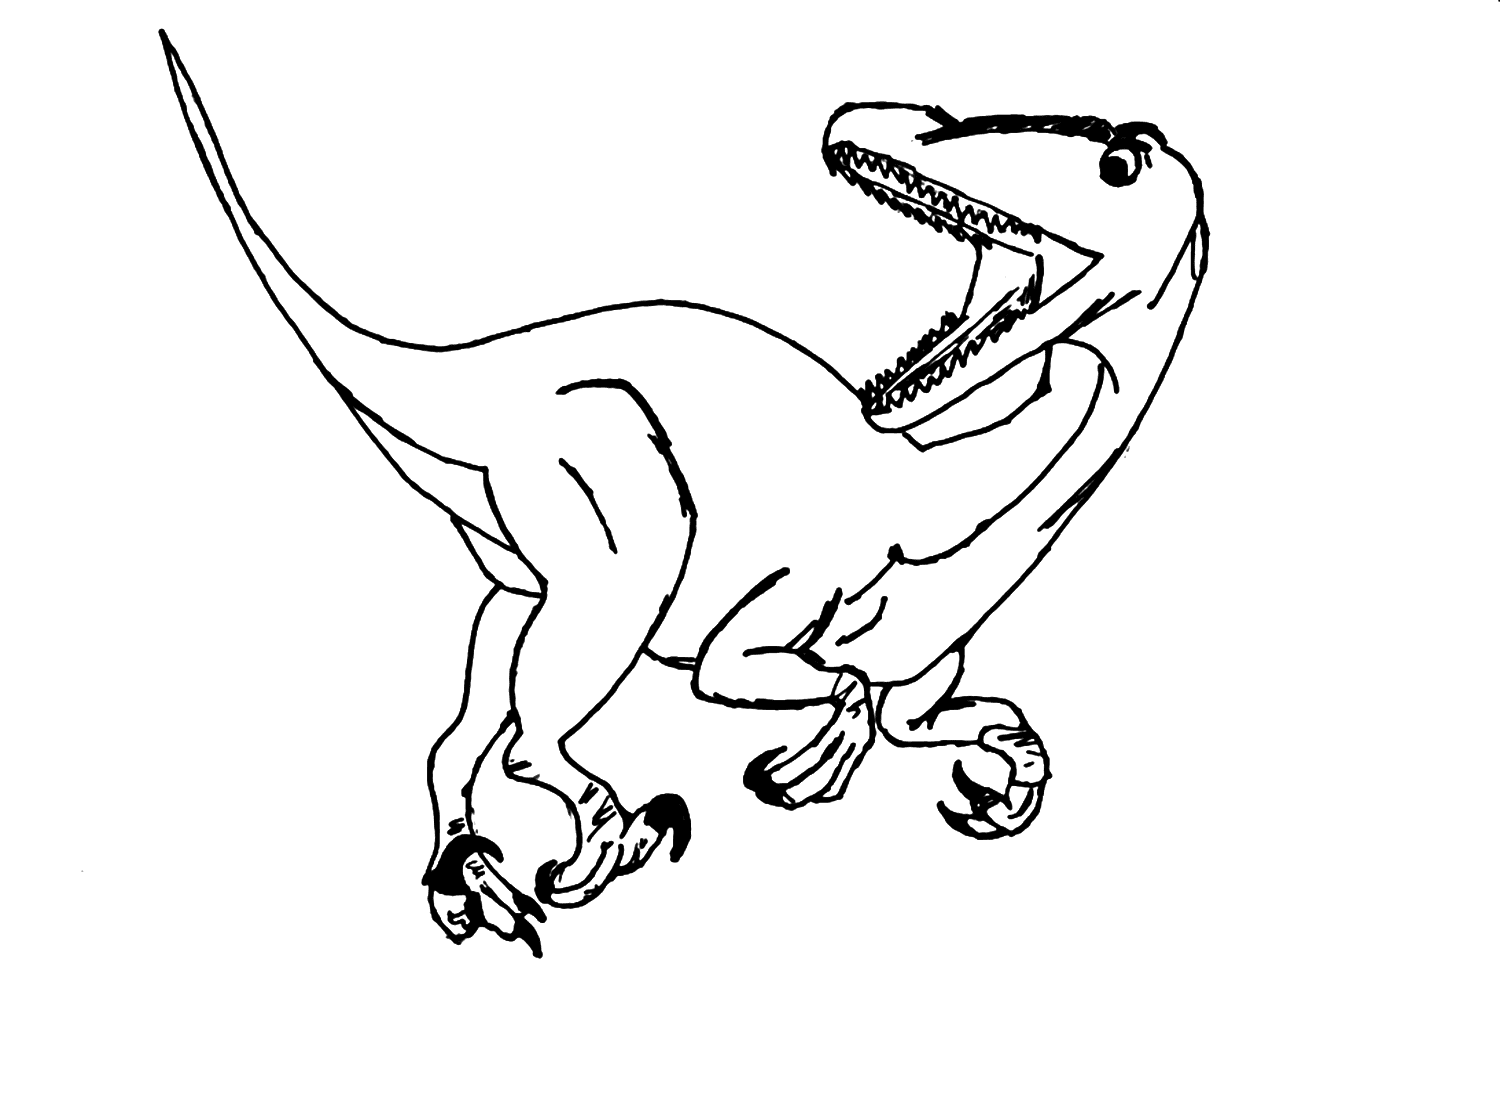 Jurassic World Coloring Pages To Print Coloring Pages